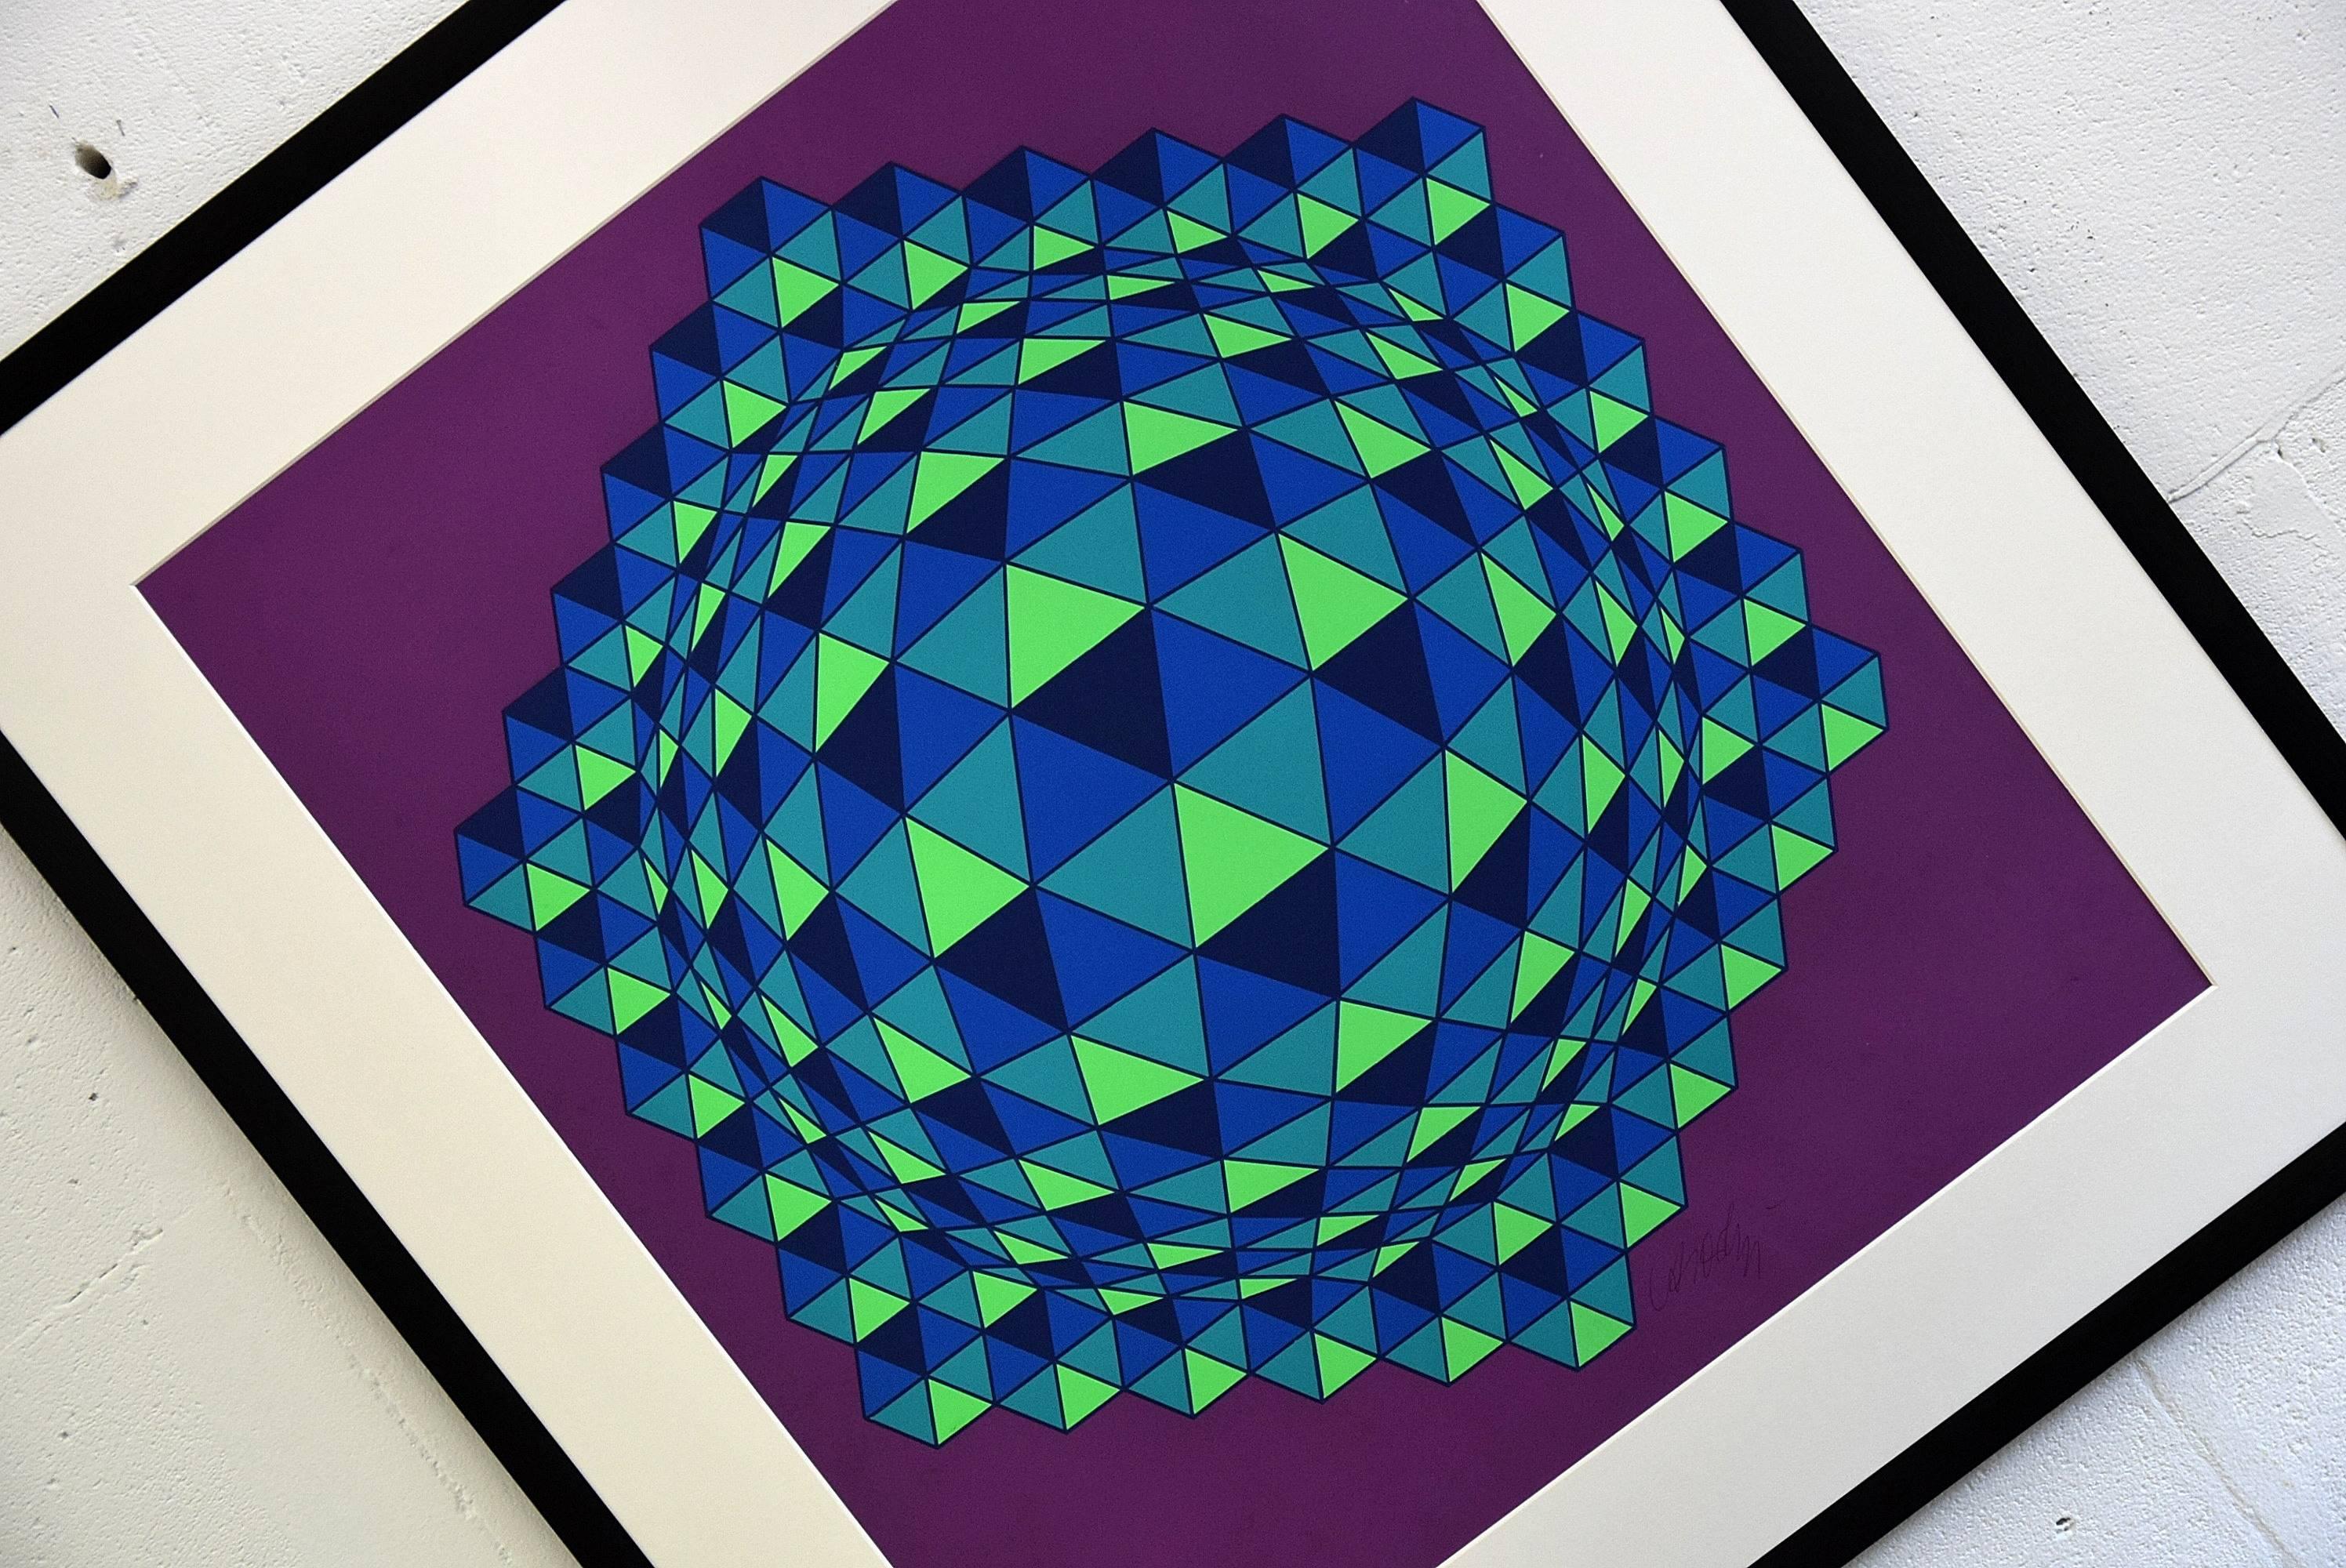 Hungarian Victor Vasarely